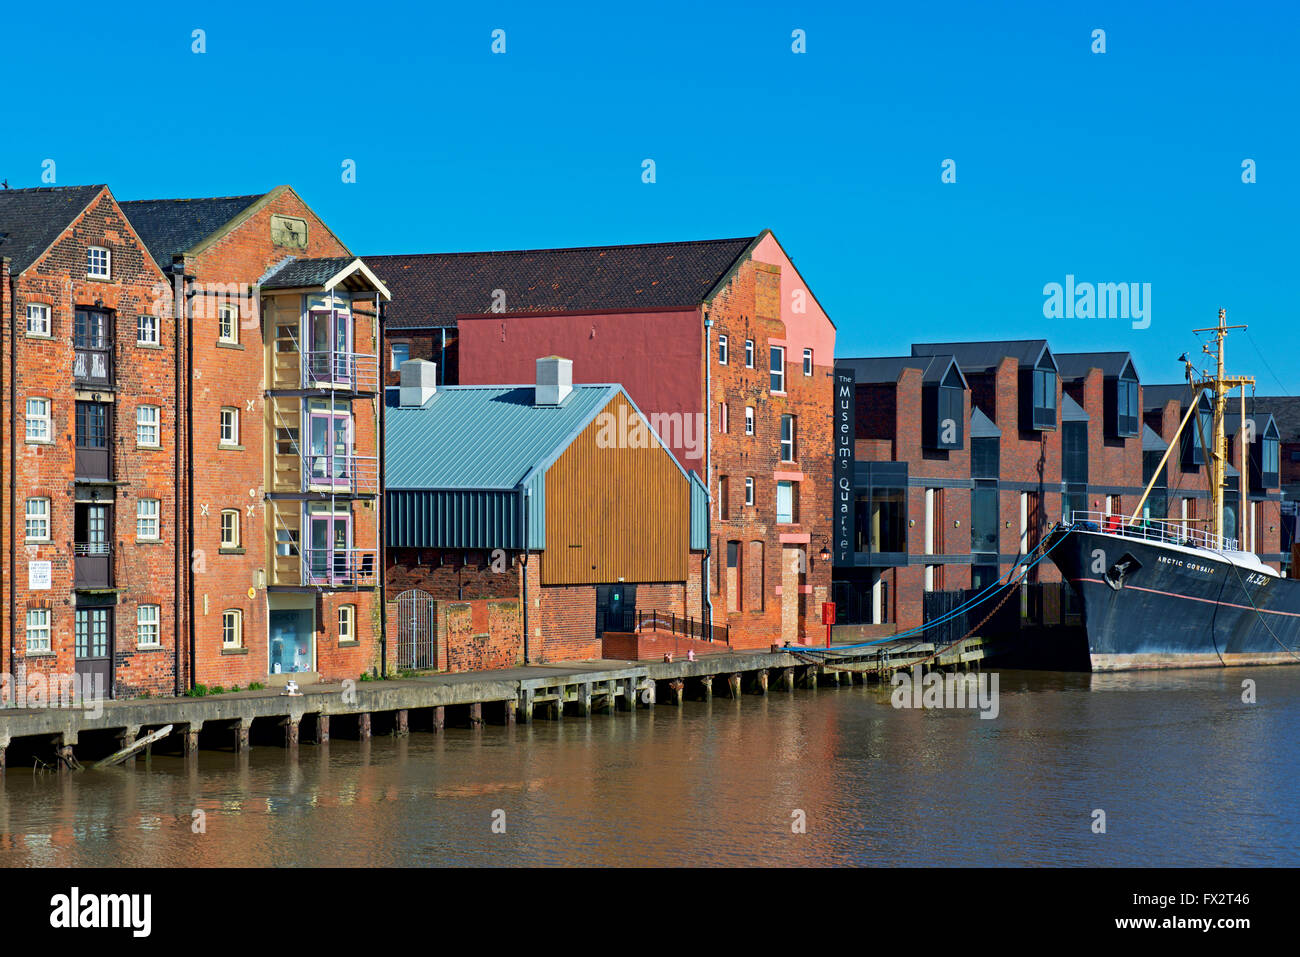 Trawler, the Arctic Corsair, moored on the River Hull, Hull, East Riding of Yorkshire, Humberside, England UK Stock Photo